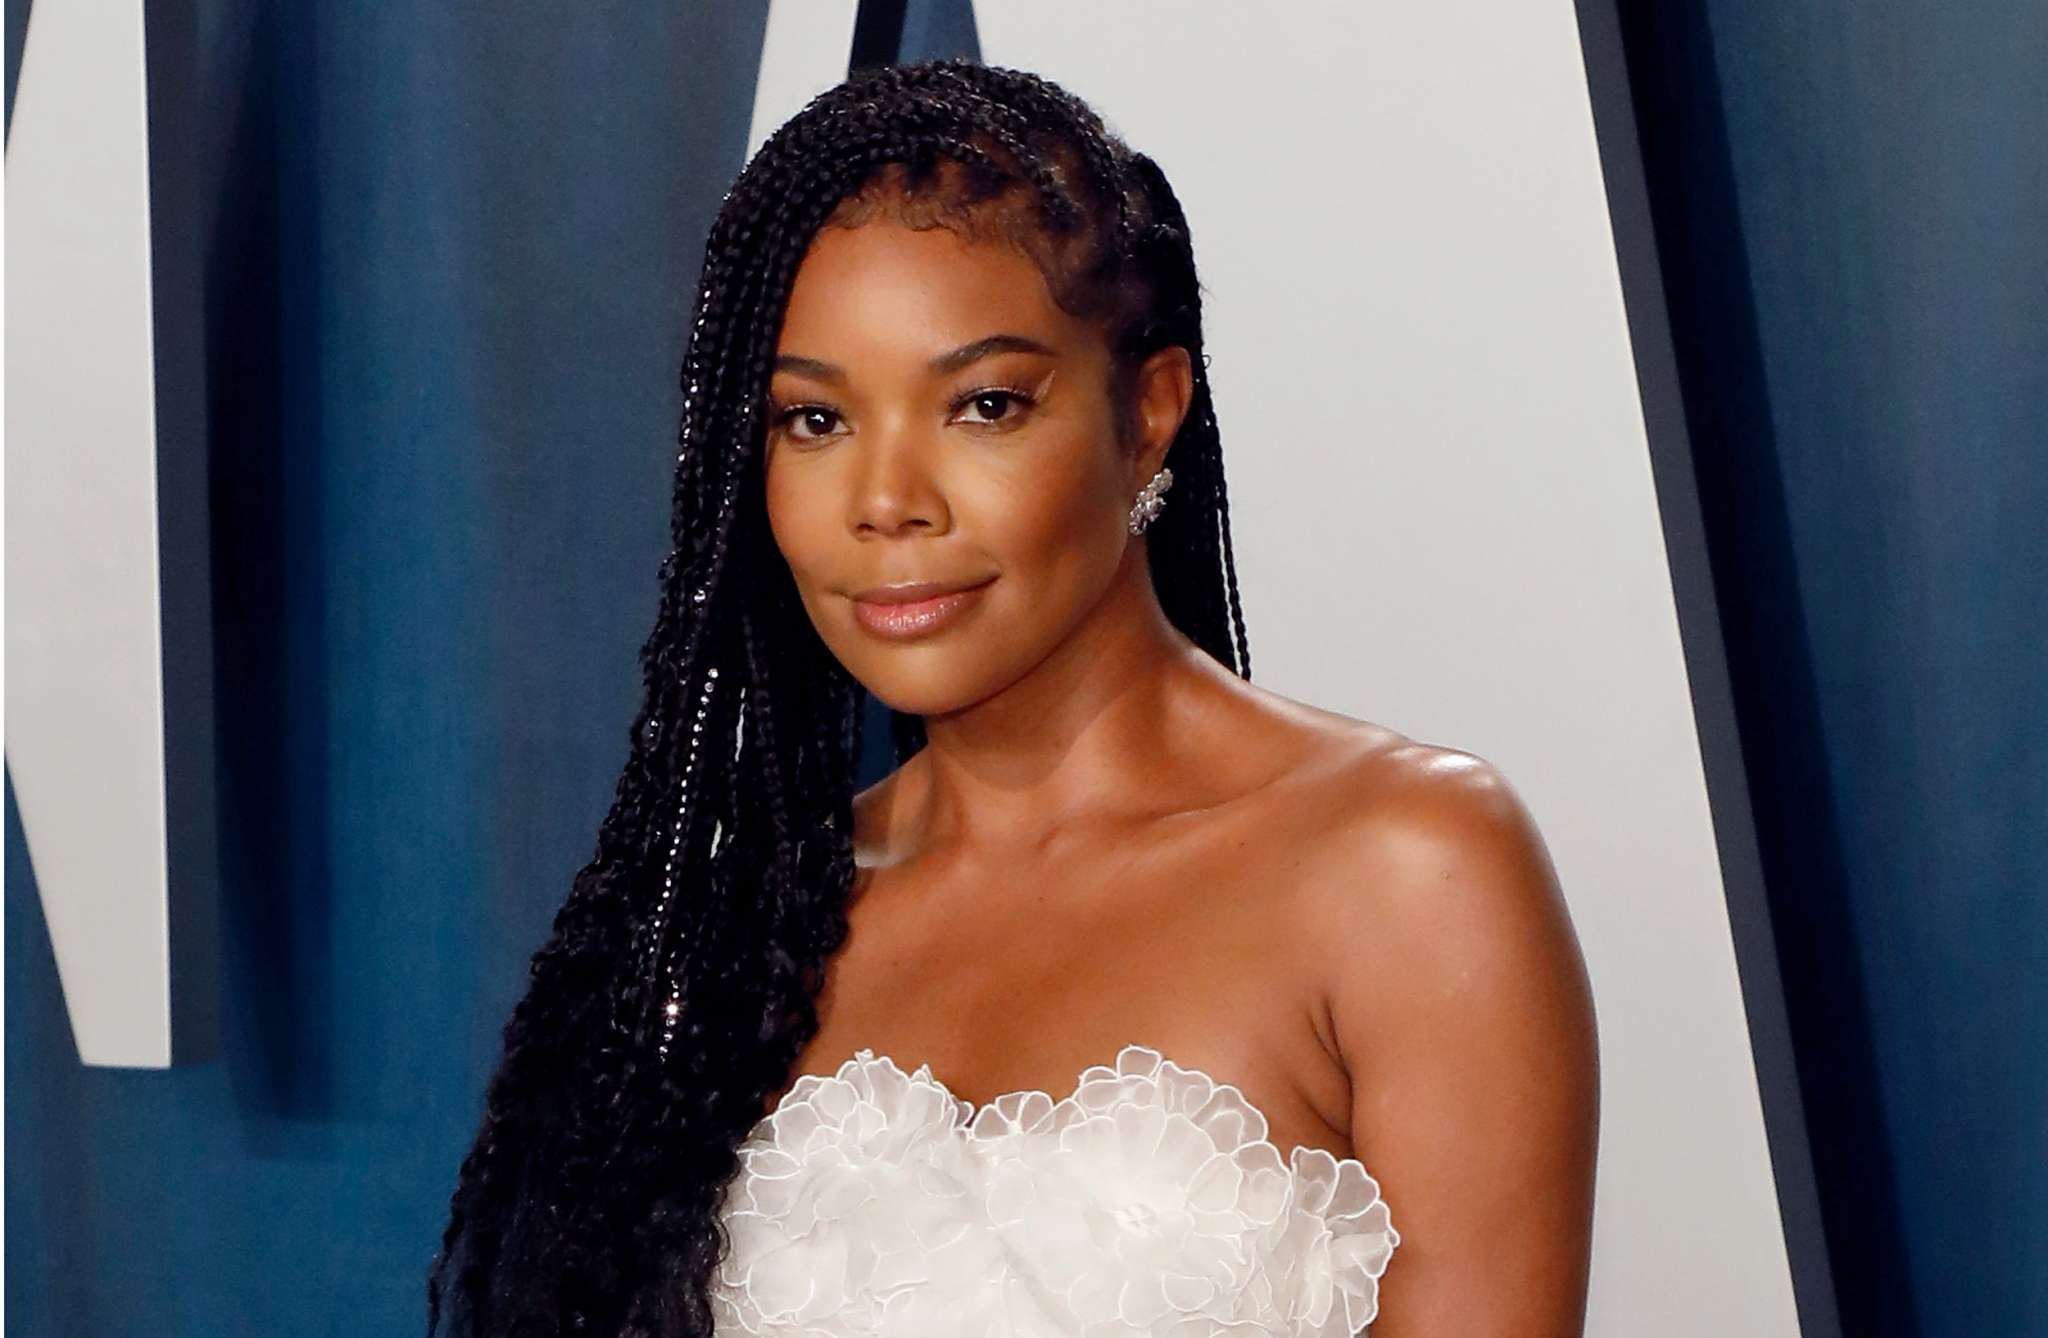 gabrielle-union-tells-fans-that-kaavia-james-is-already-borrowing-her-things